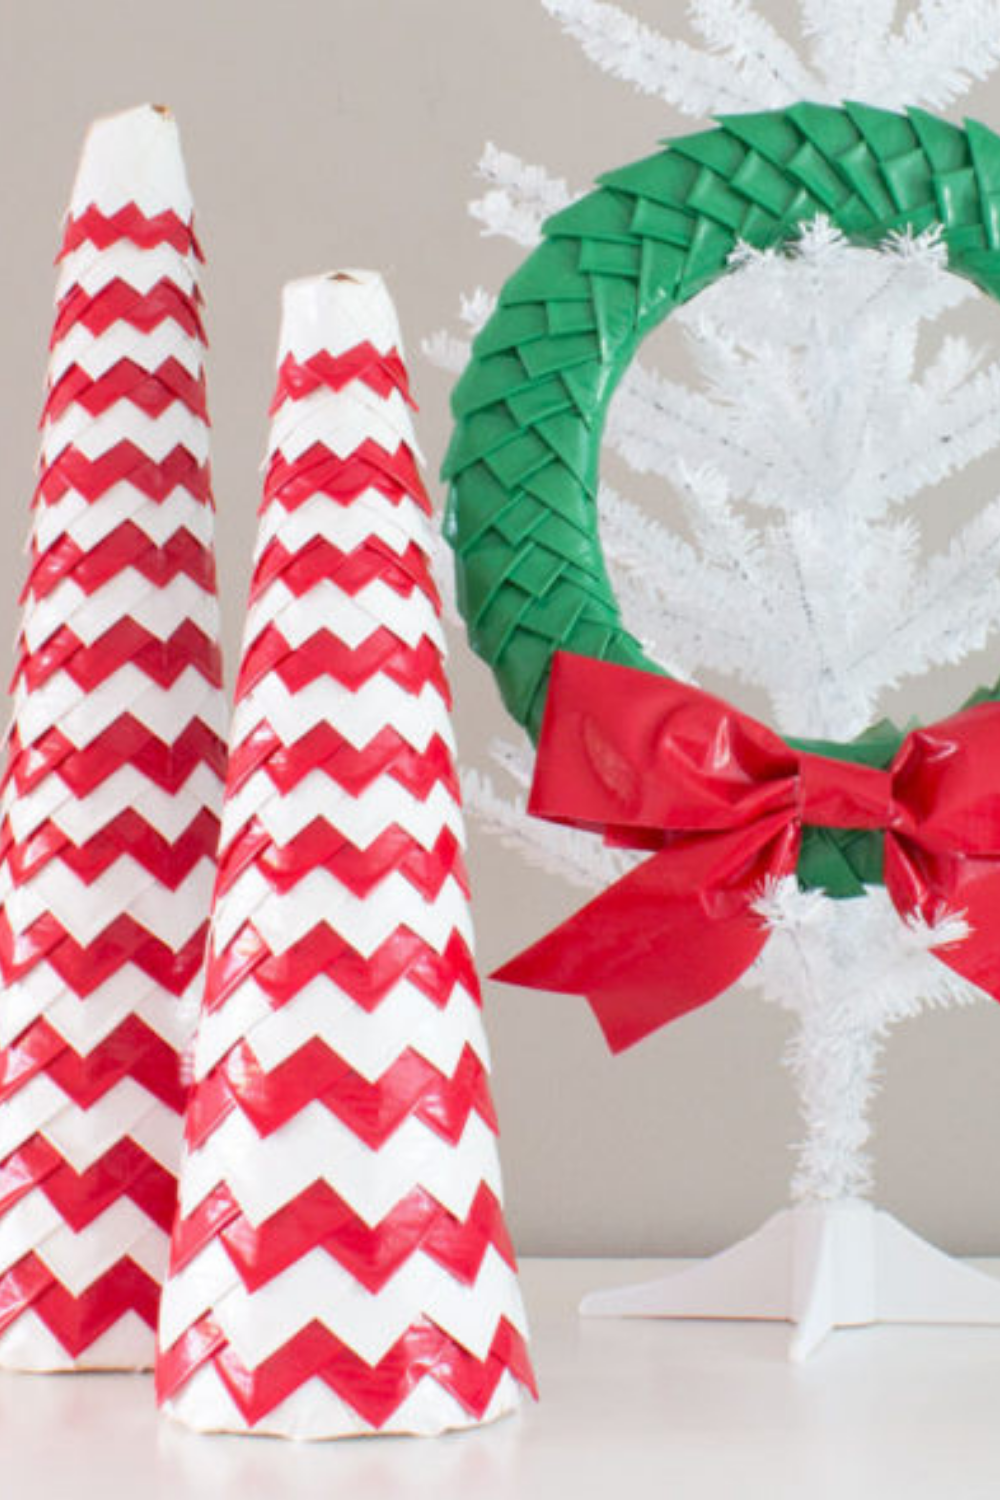 15 best holiday duct tape crafts